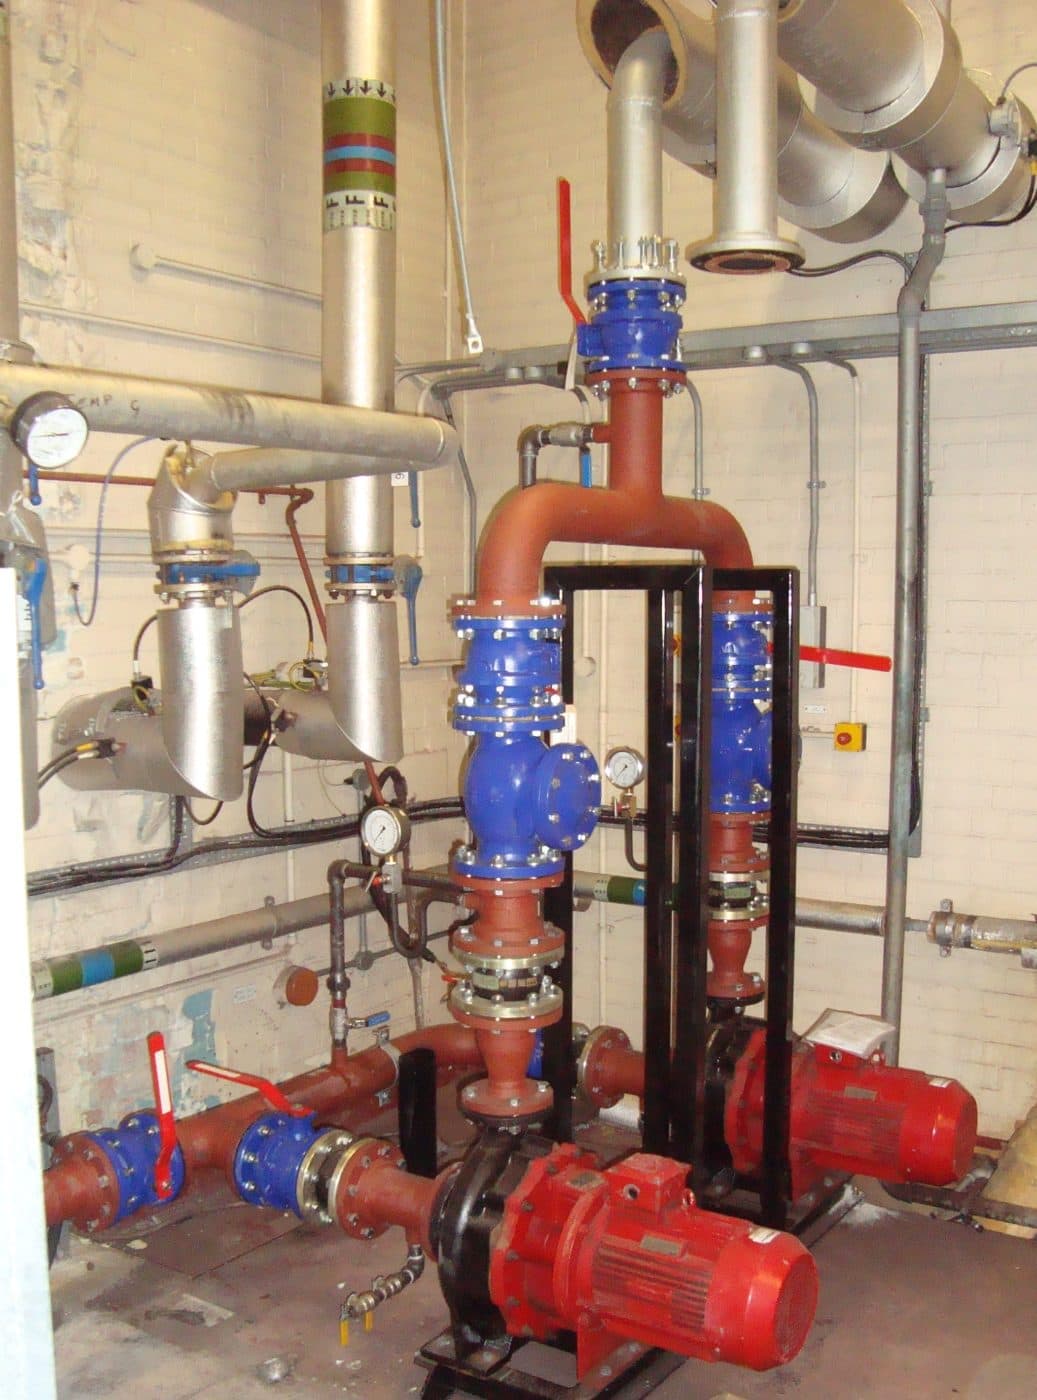 Dual Pump Station Overview pipework and gauges - Hot Water - Modifications Government Facility